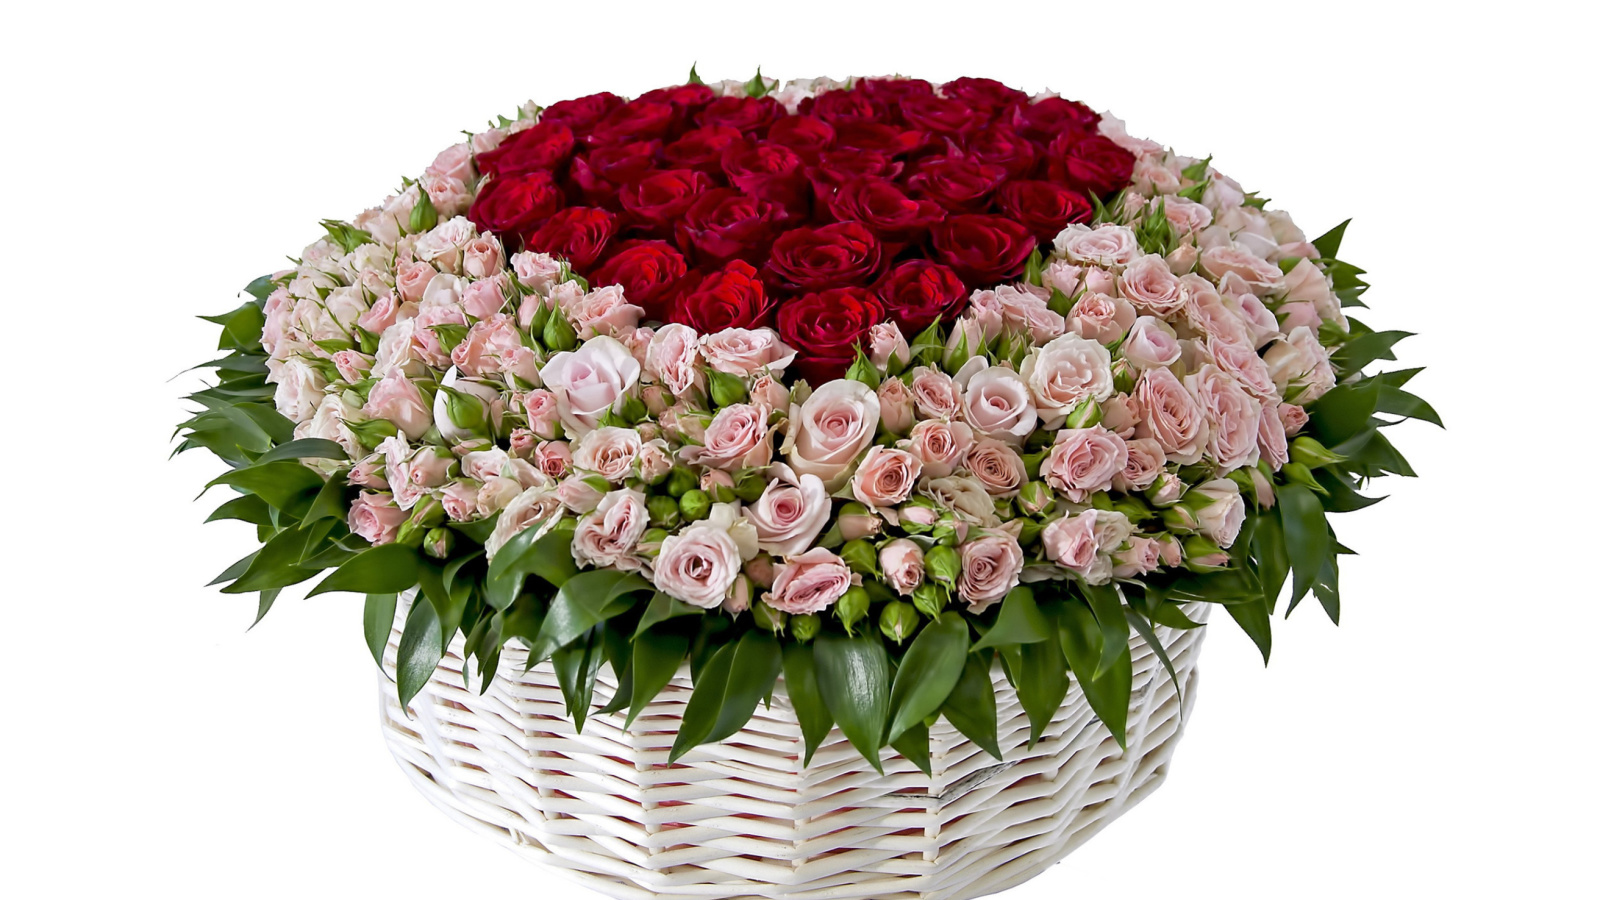 Basket of Roses from Florist wallpaper 1600x900